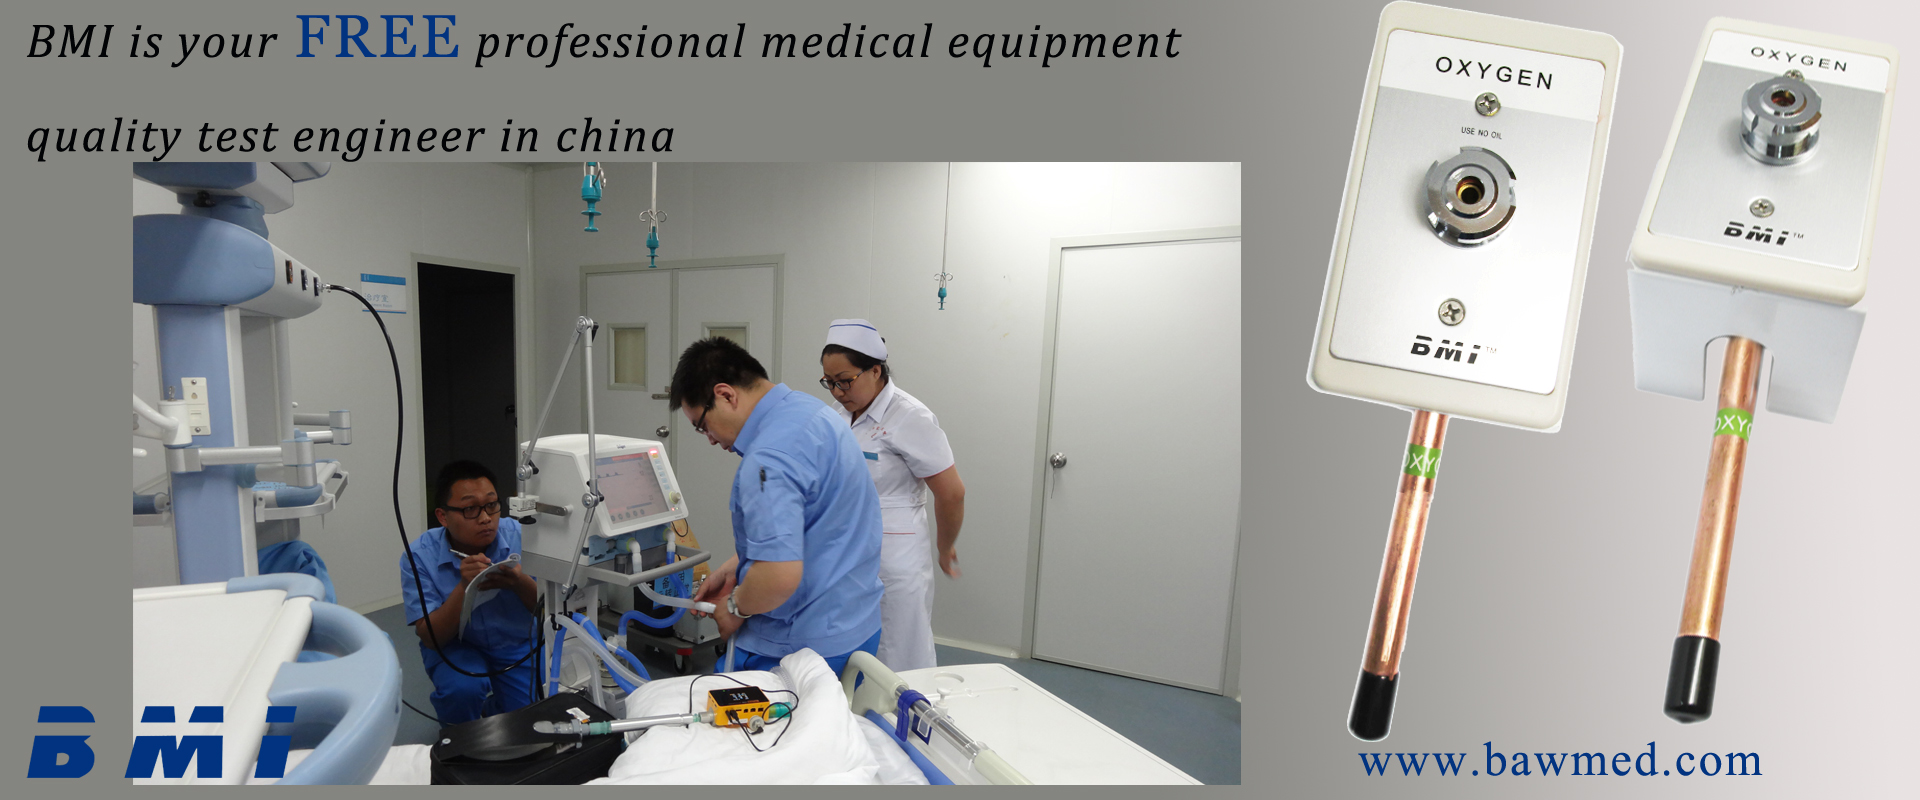 BMI is your free professional medical equiment quality test engineer in china